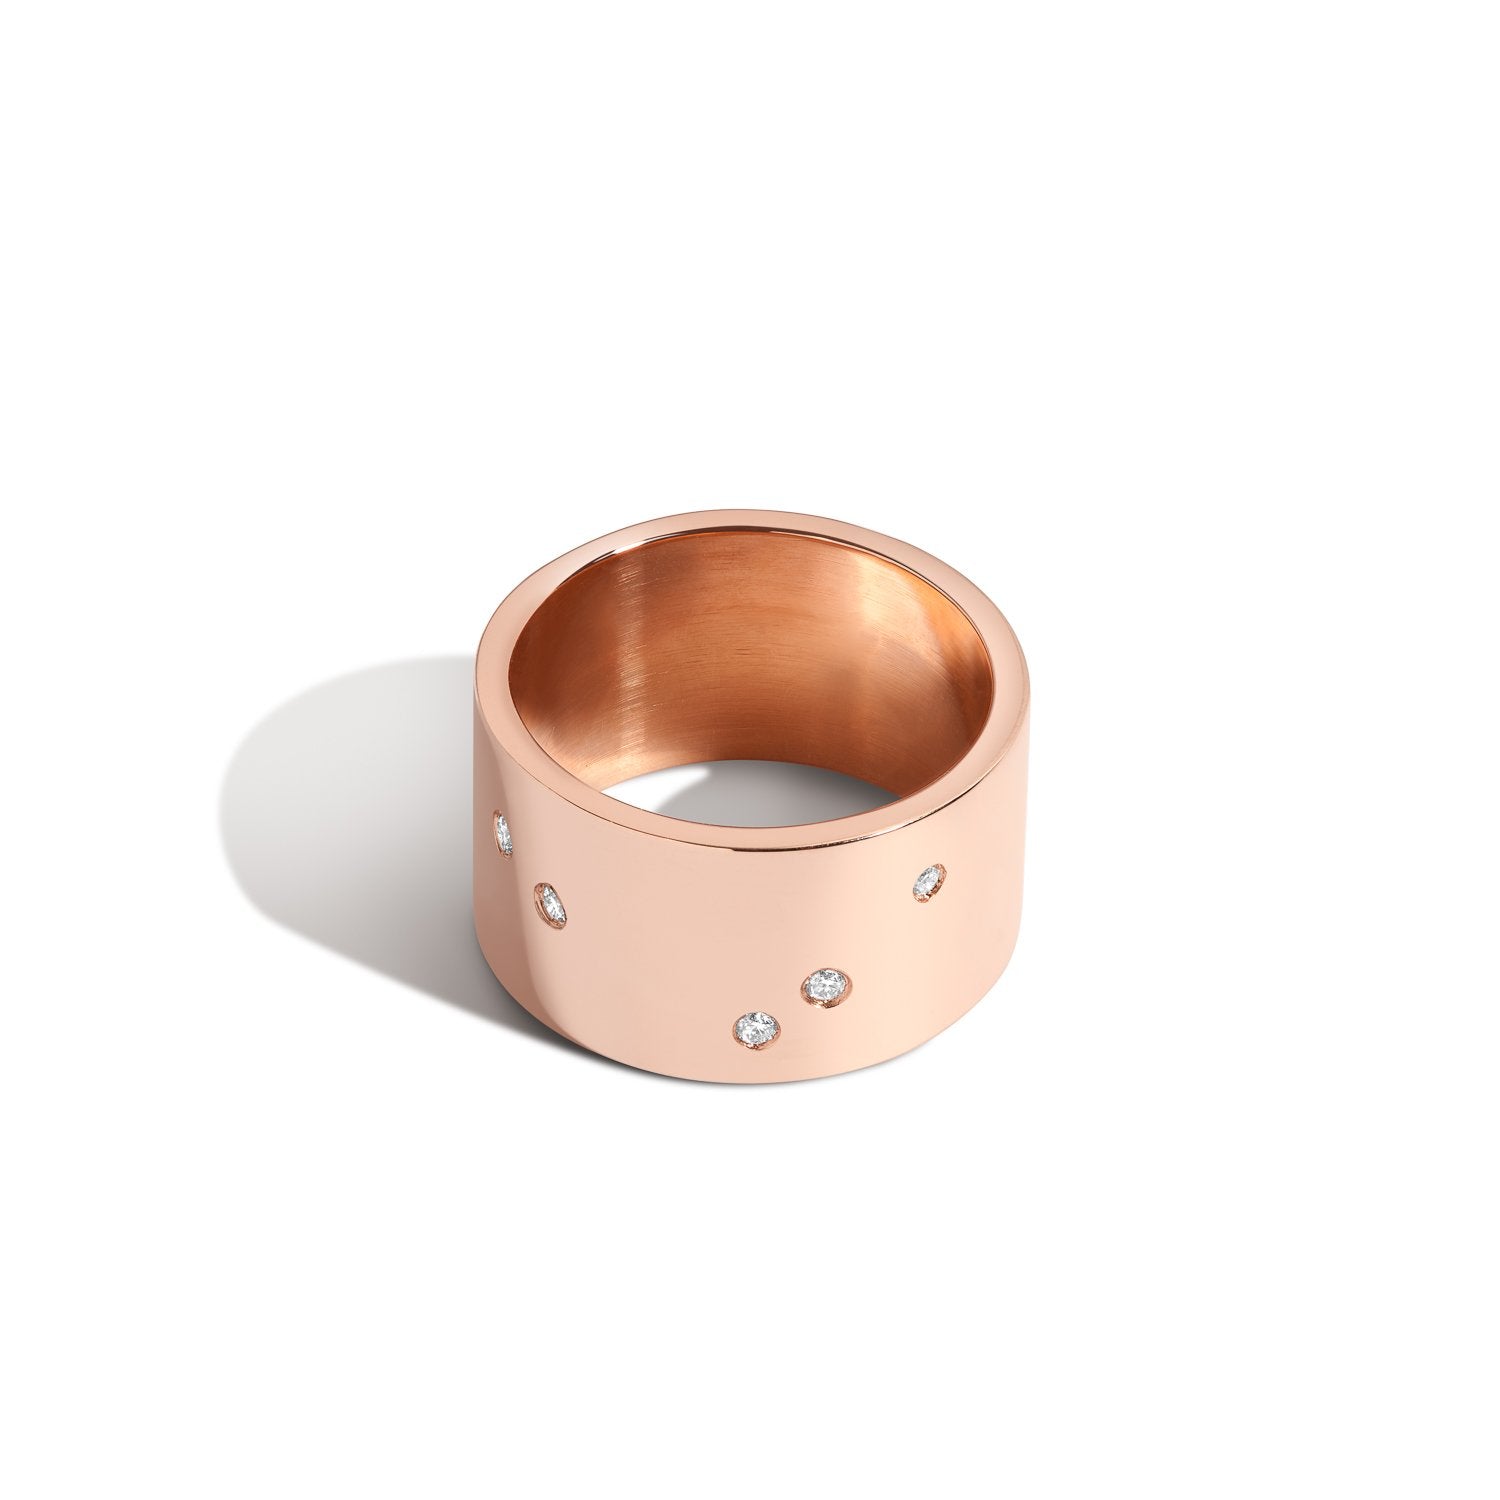 Shahla Karimi Jewelry Zodiac Reveal Ring Collection with White Diamonds - Libra - 14K Rose Gold - Front View